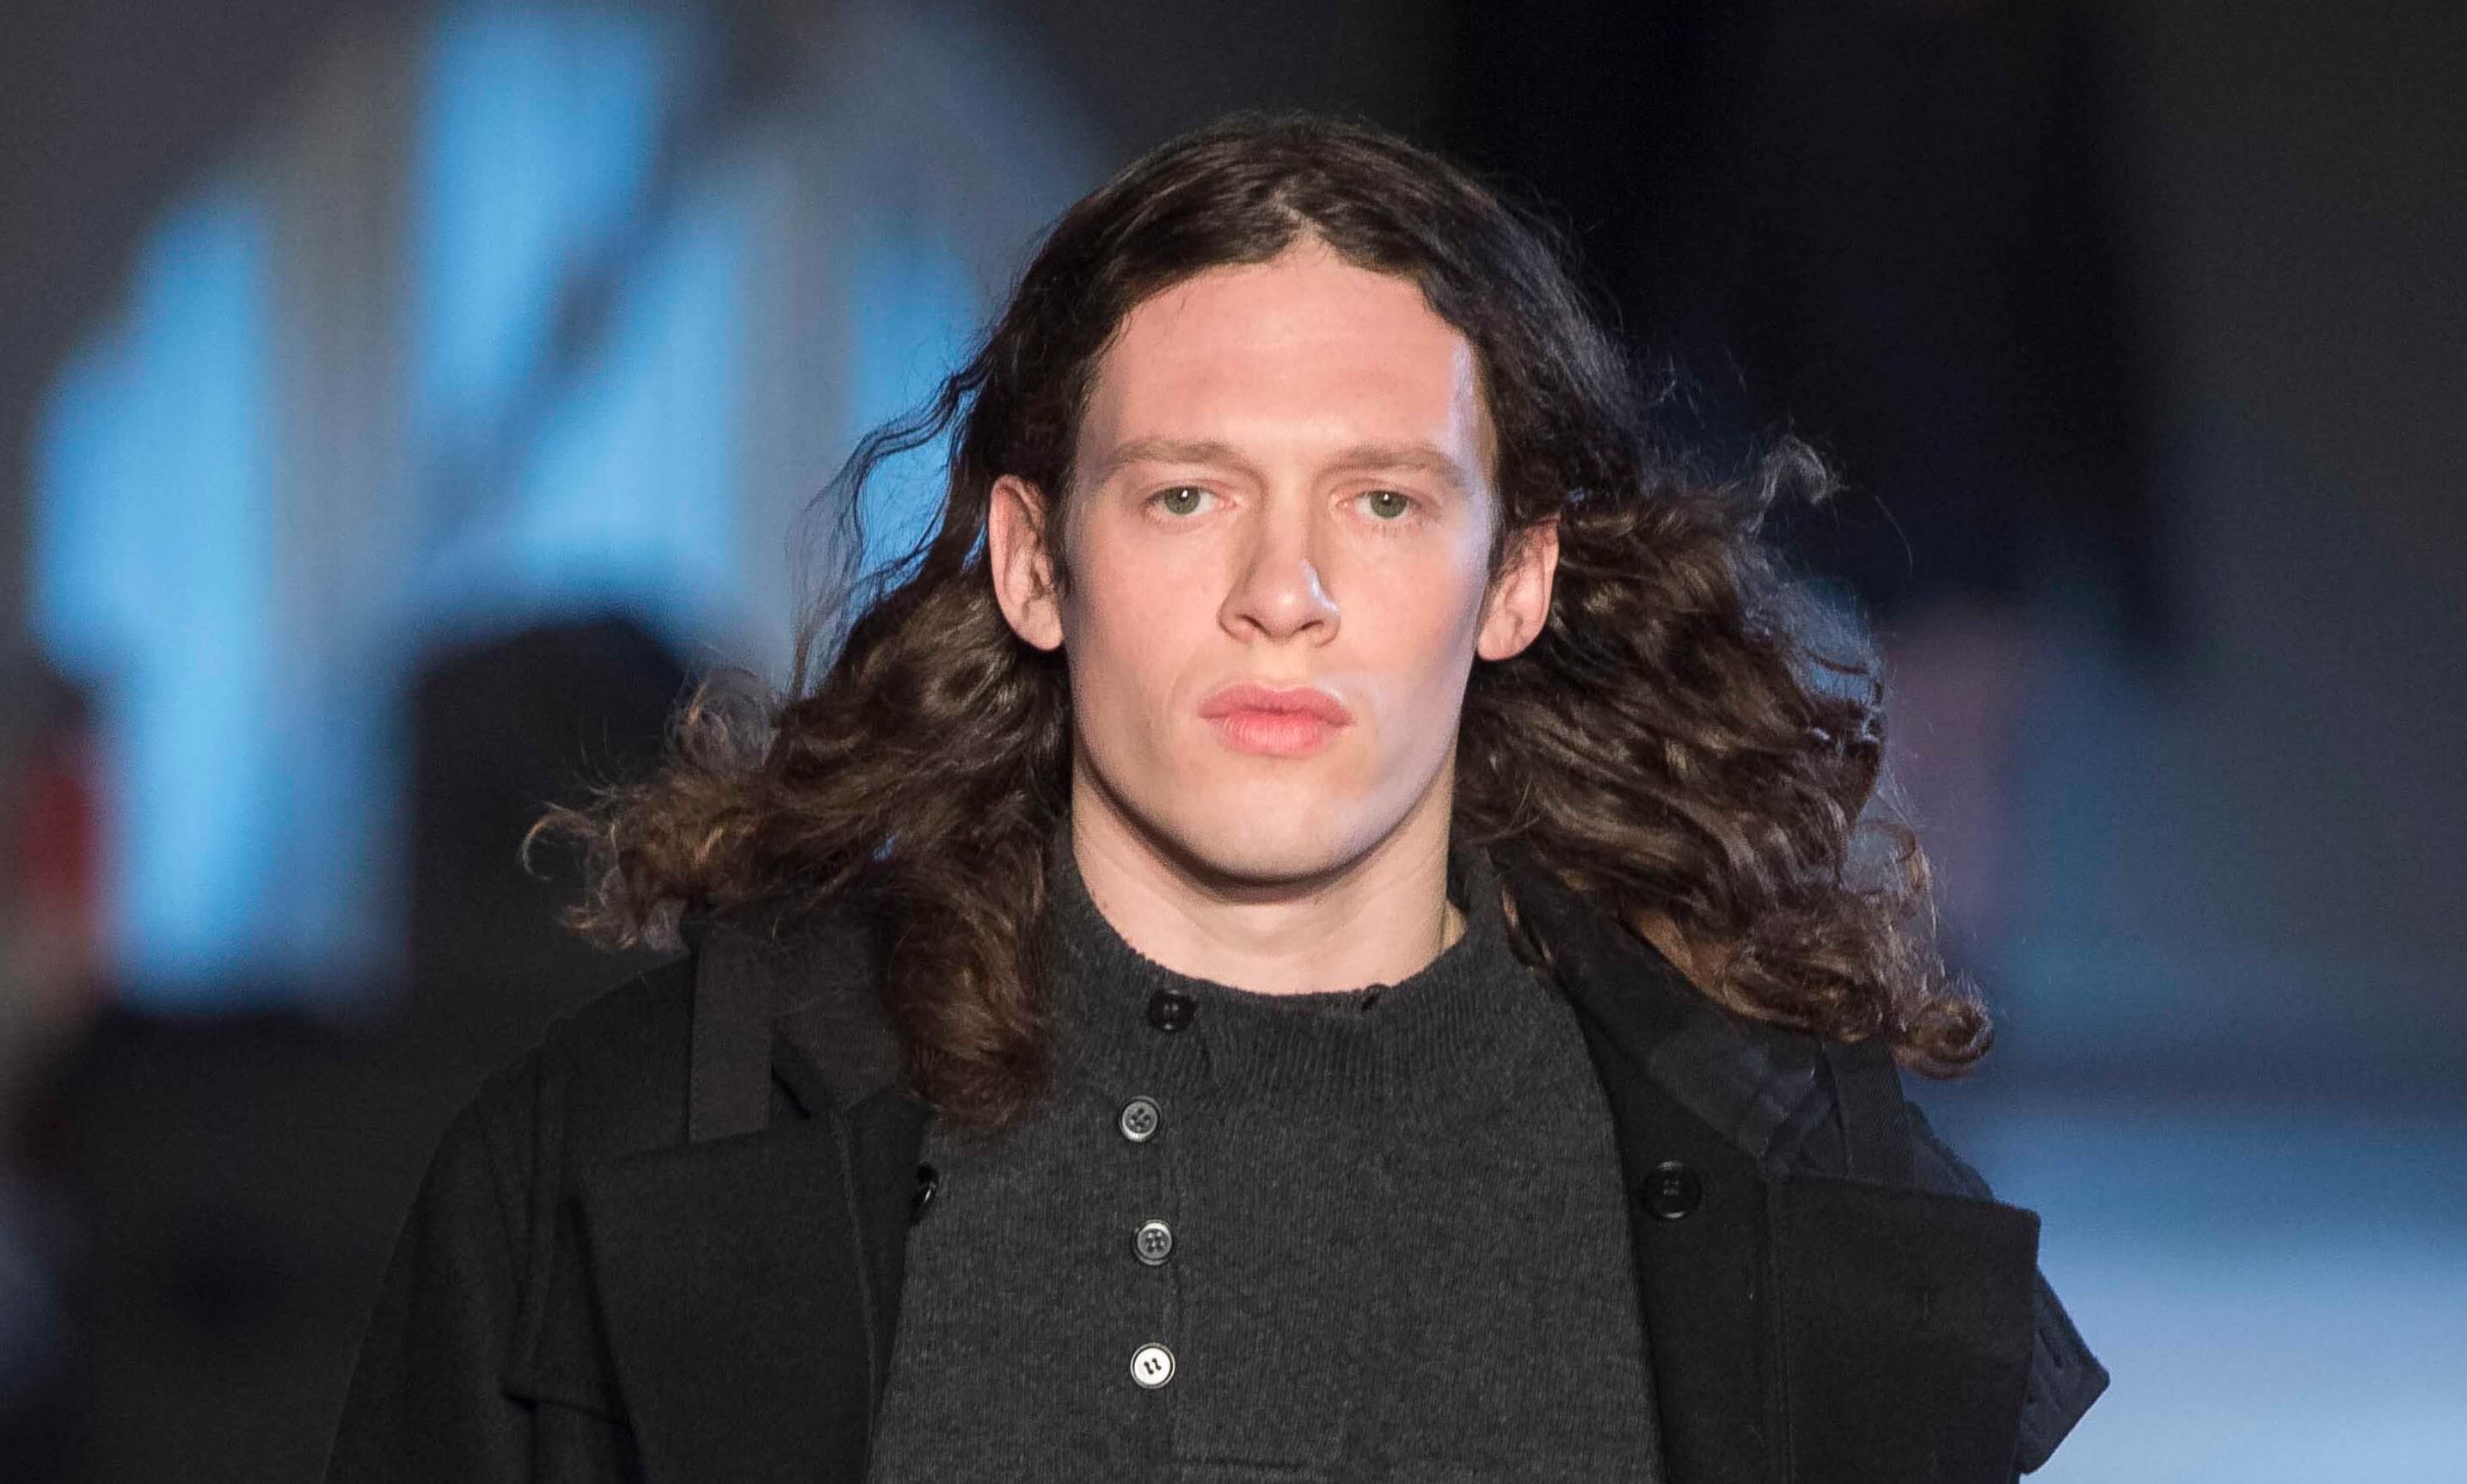 male model on the runway wearing a dark outfit with this dark brown long hair worn loose and in curls